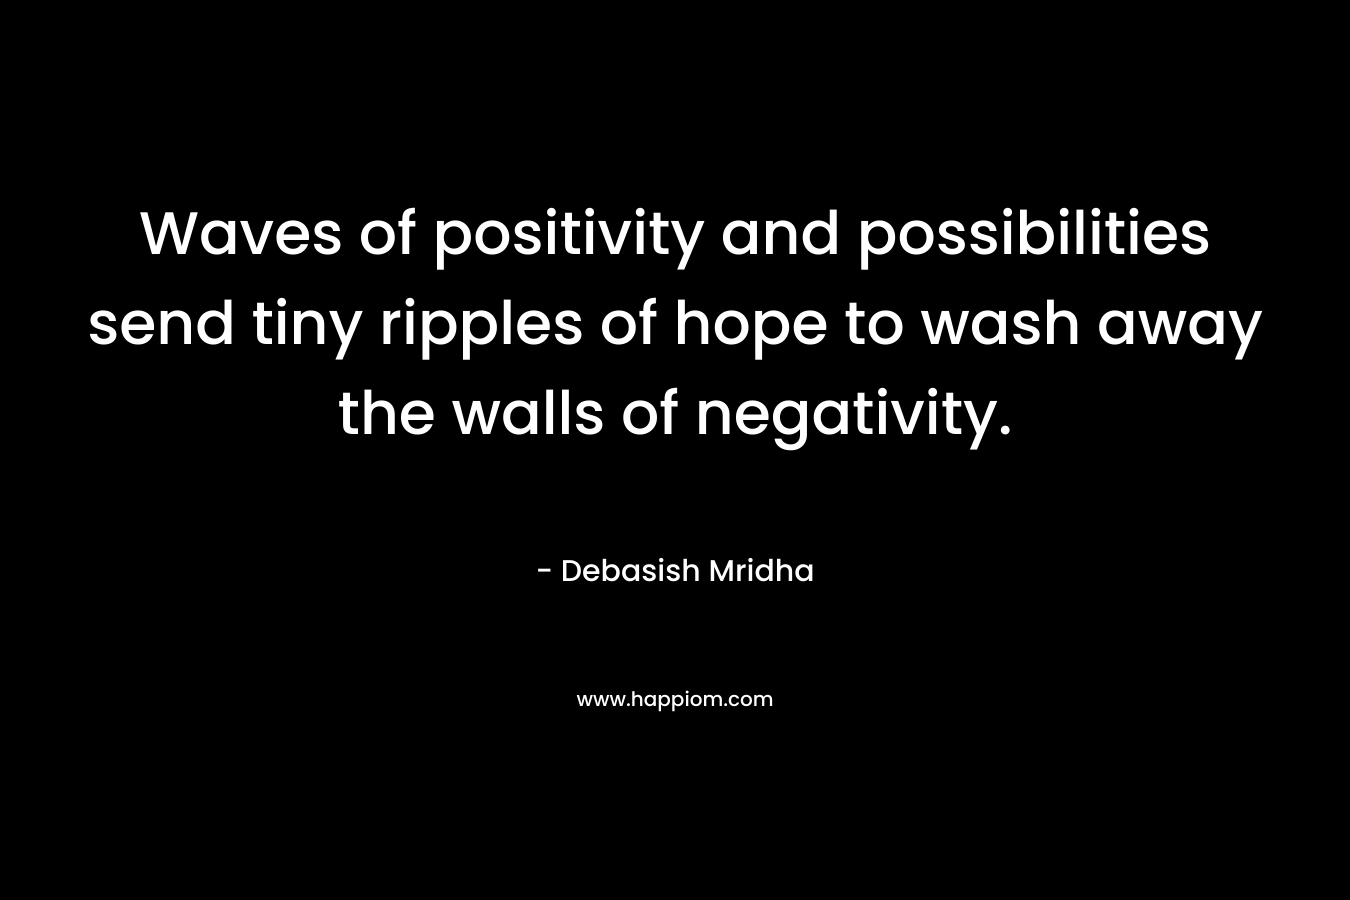 Waves of positivity and possibilities send tiny ripples of hope to wash away the walls of negativity. – Debasish Mridha